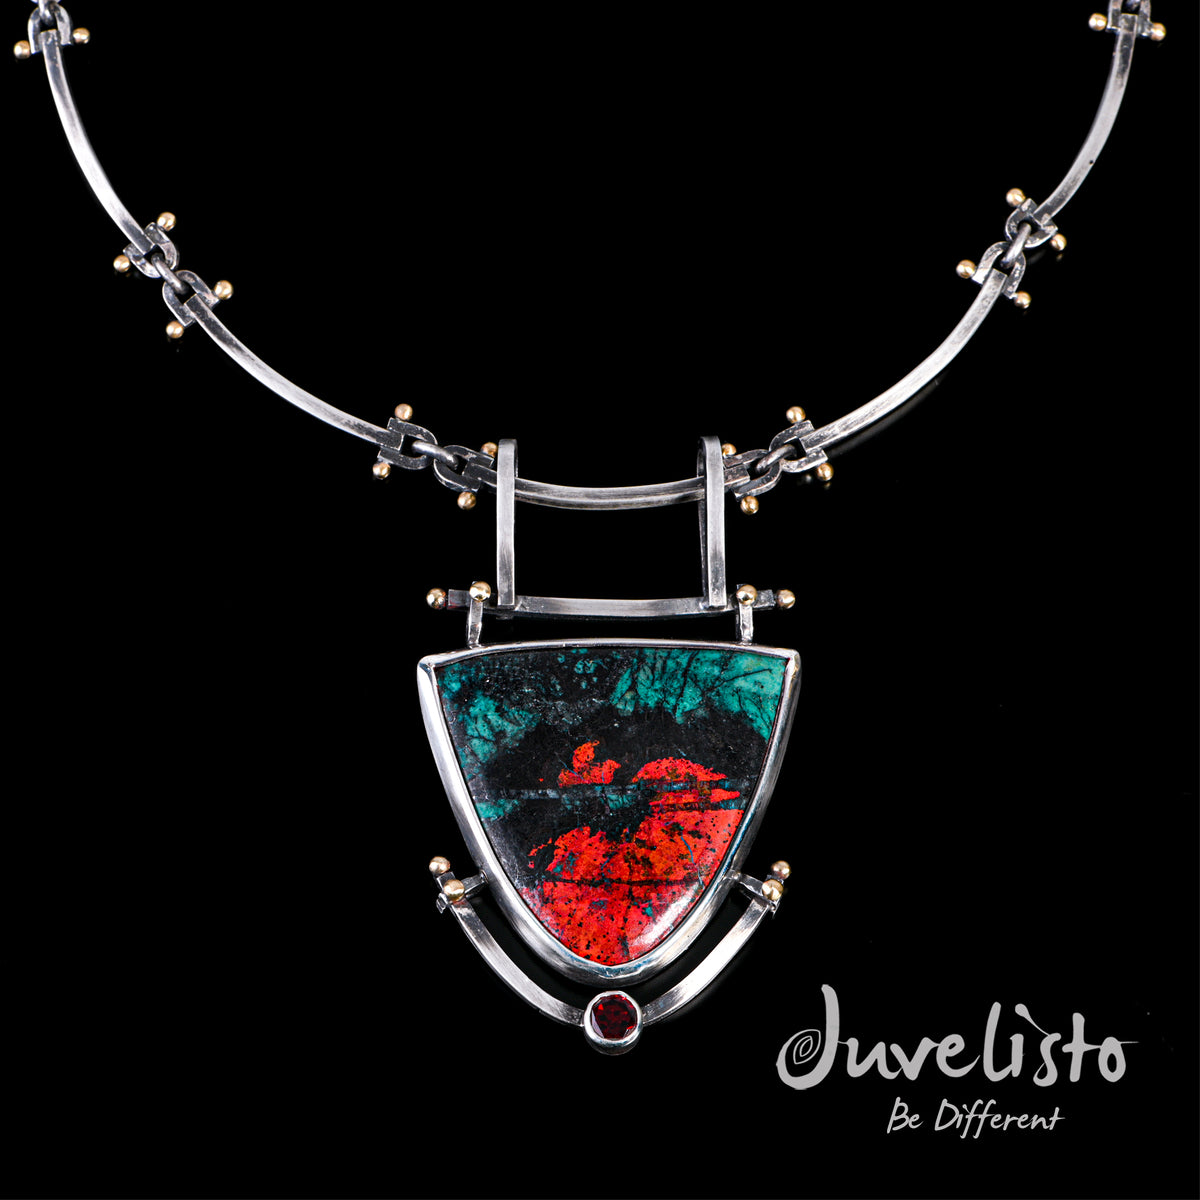 Juvelisto Design Vancouver Silver and Bronze Industrial Statement Necklace with Chrysocolla Cuprite and Garnet